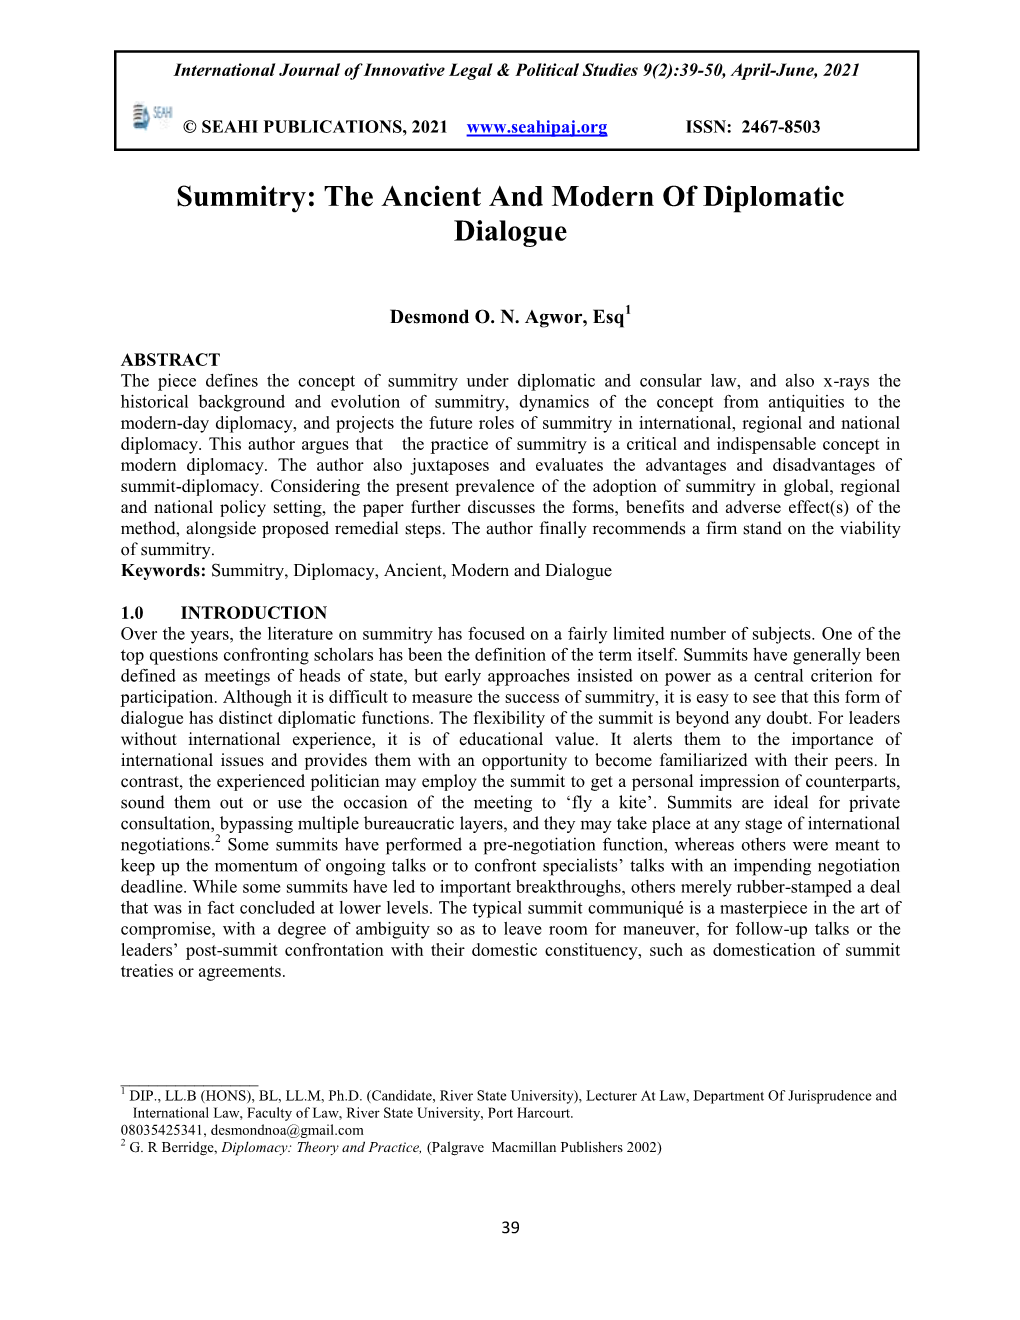 Summitry: the Ancient and Modern of Diplomatic Dialogue